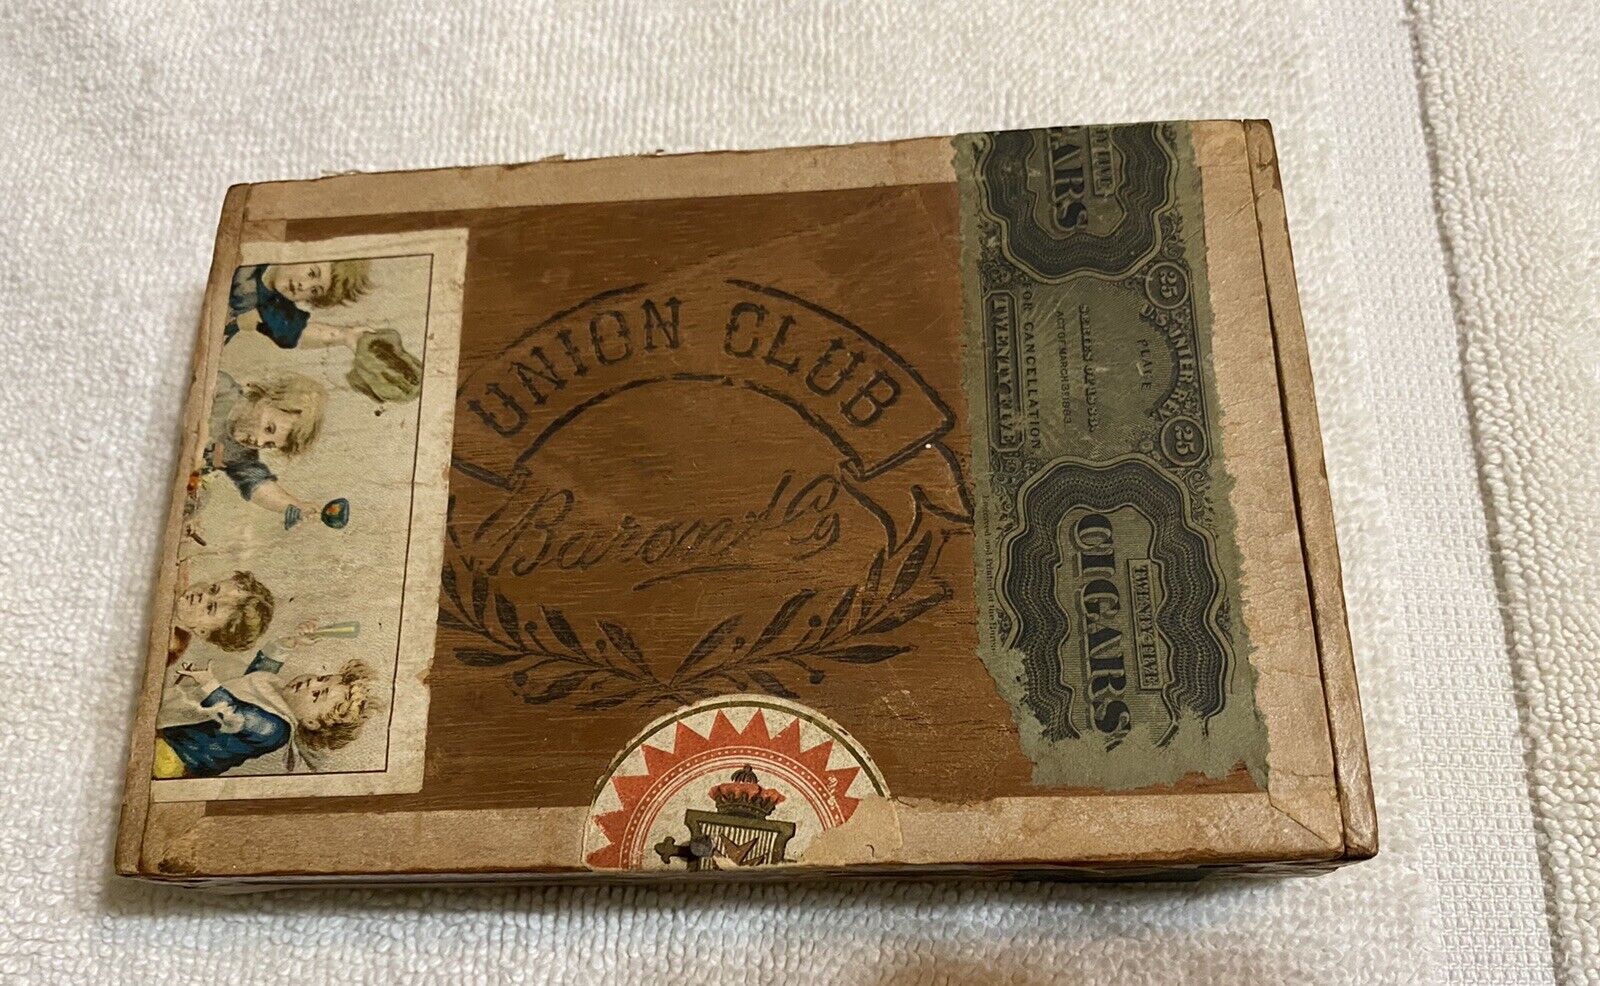 Antique Union Club Cigar Box with Children Smoking Cigars and Celebrating